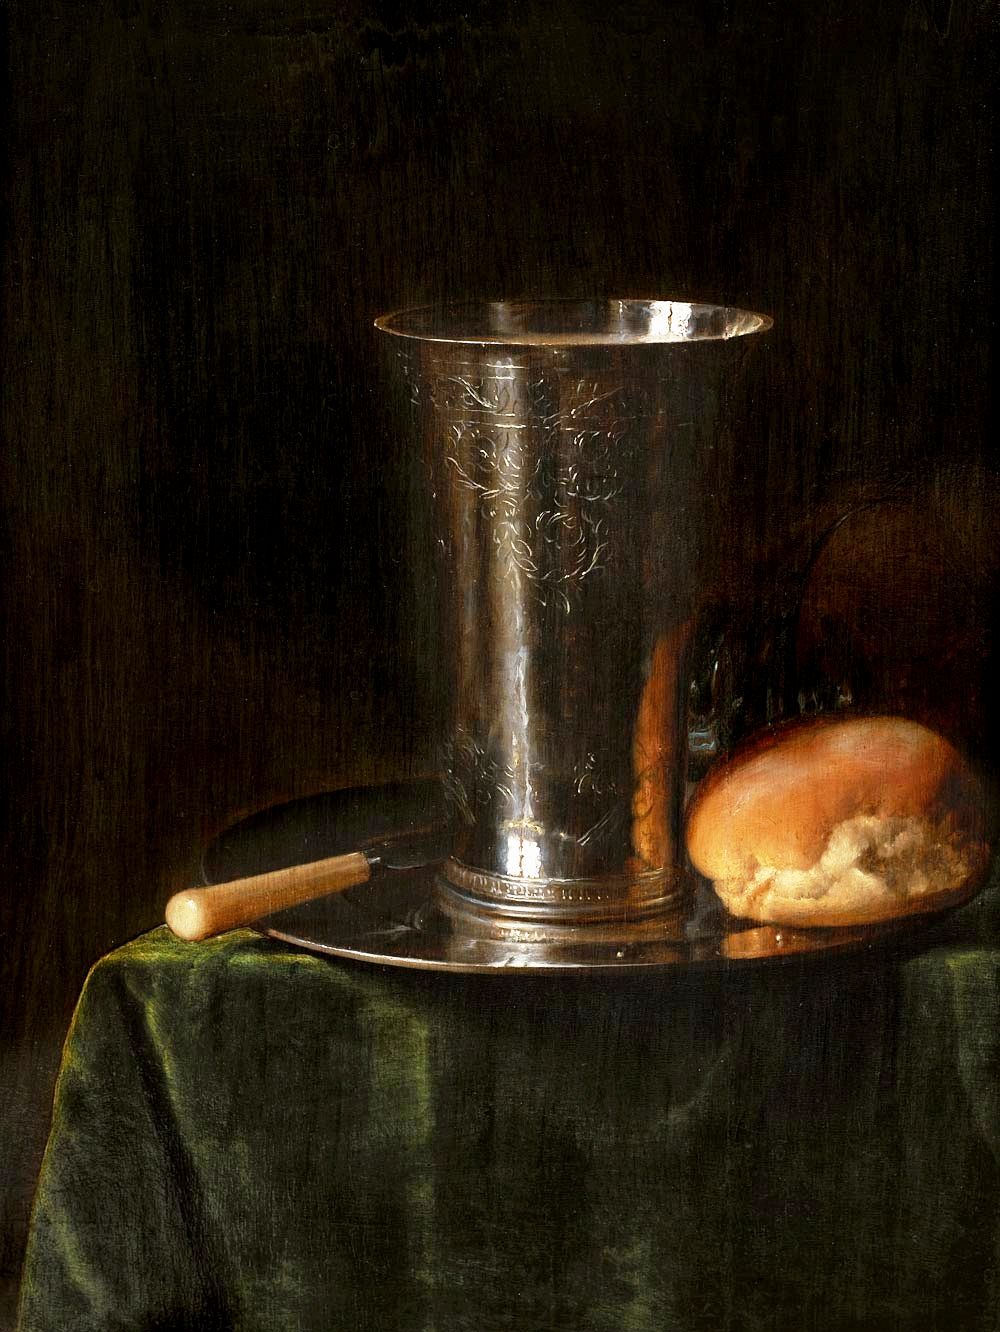 Simon Luttichuys  (1610–1661)
"Still Life With A Silver Beaker", oil, 20x15 inches, 1650